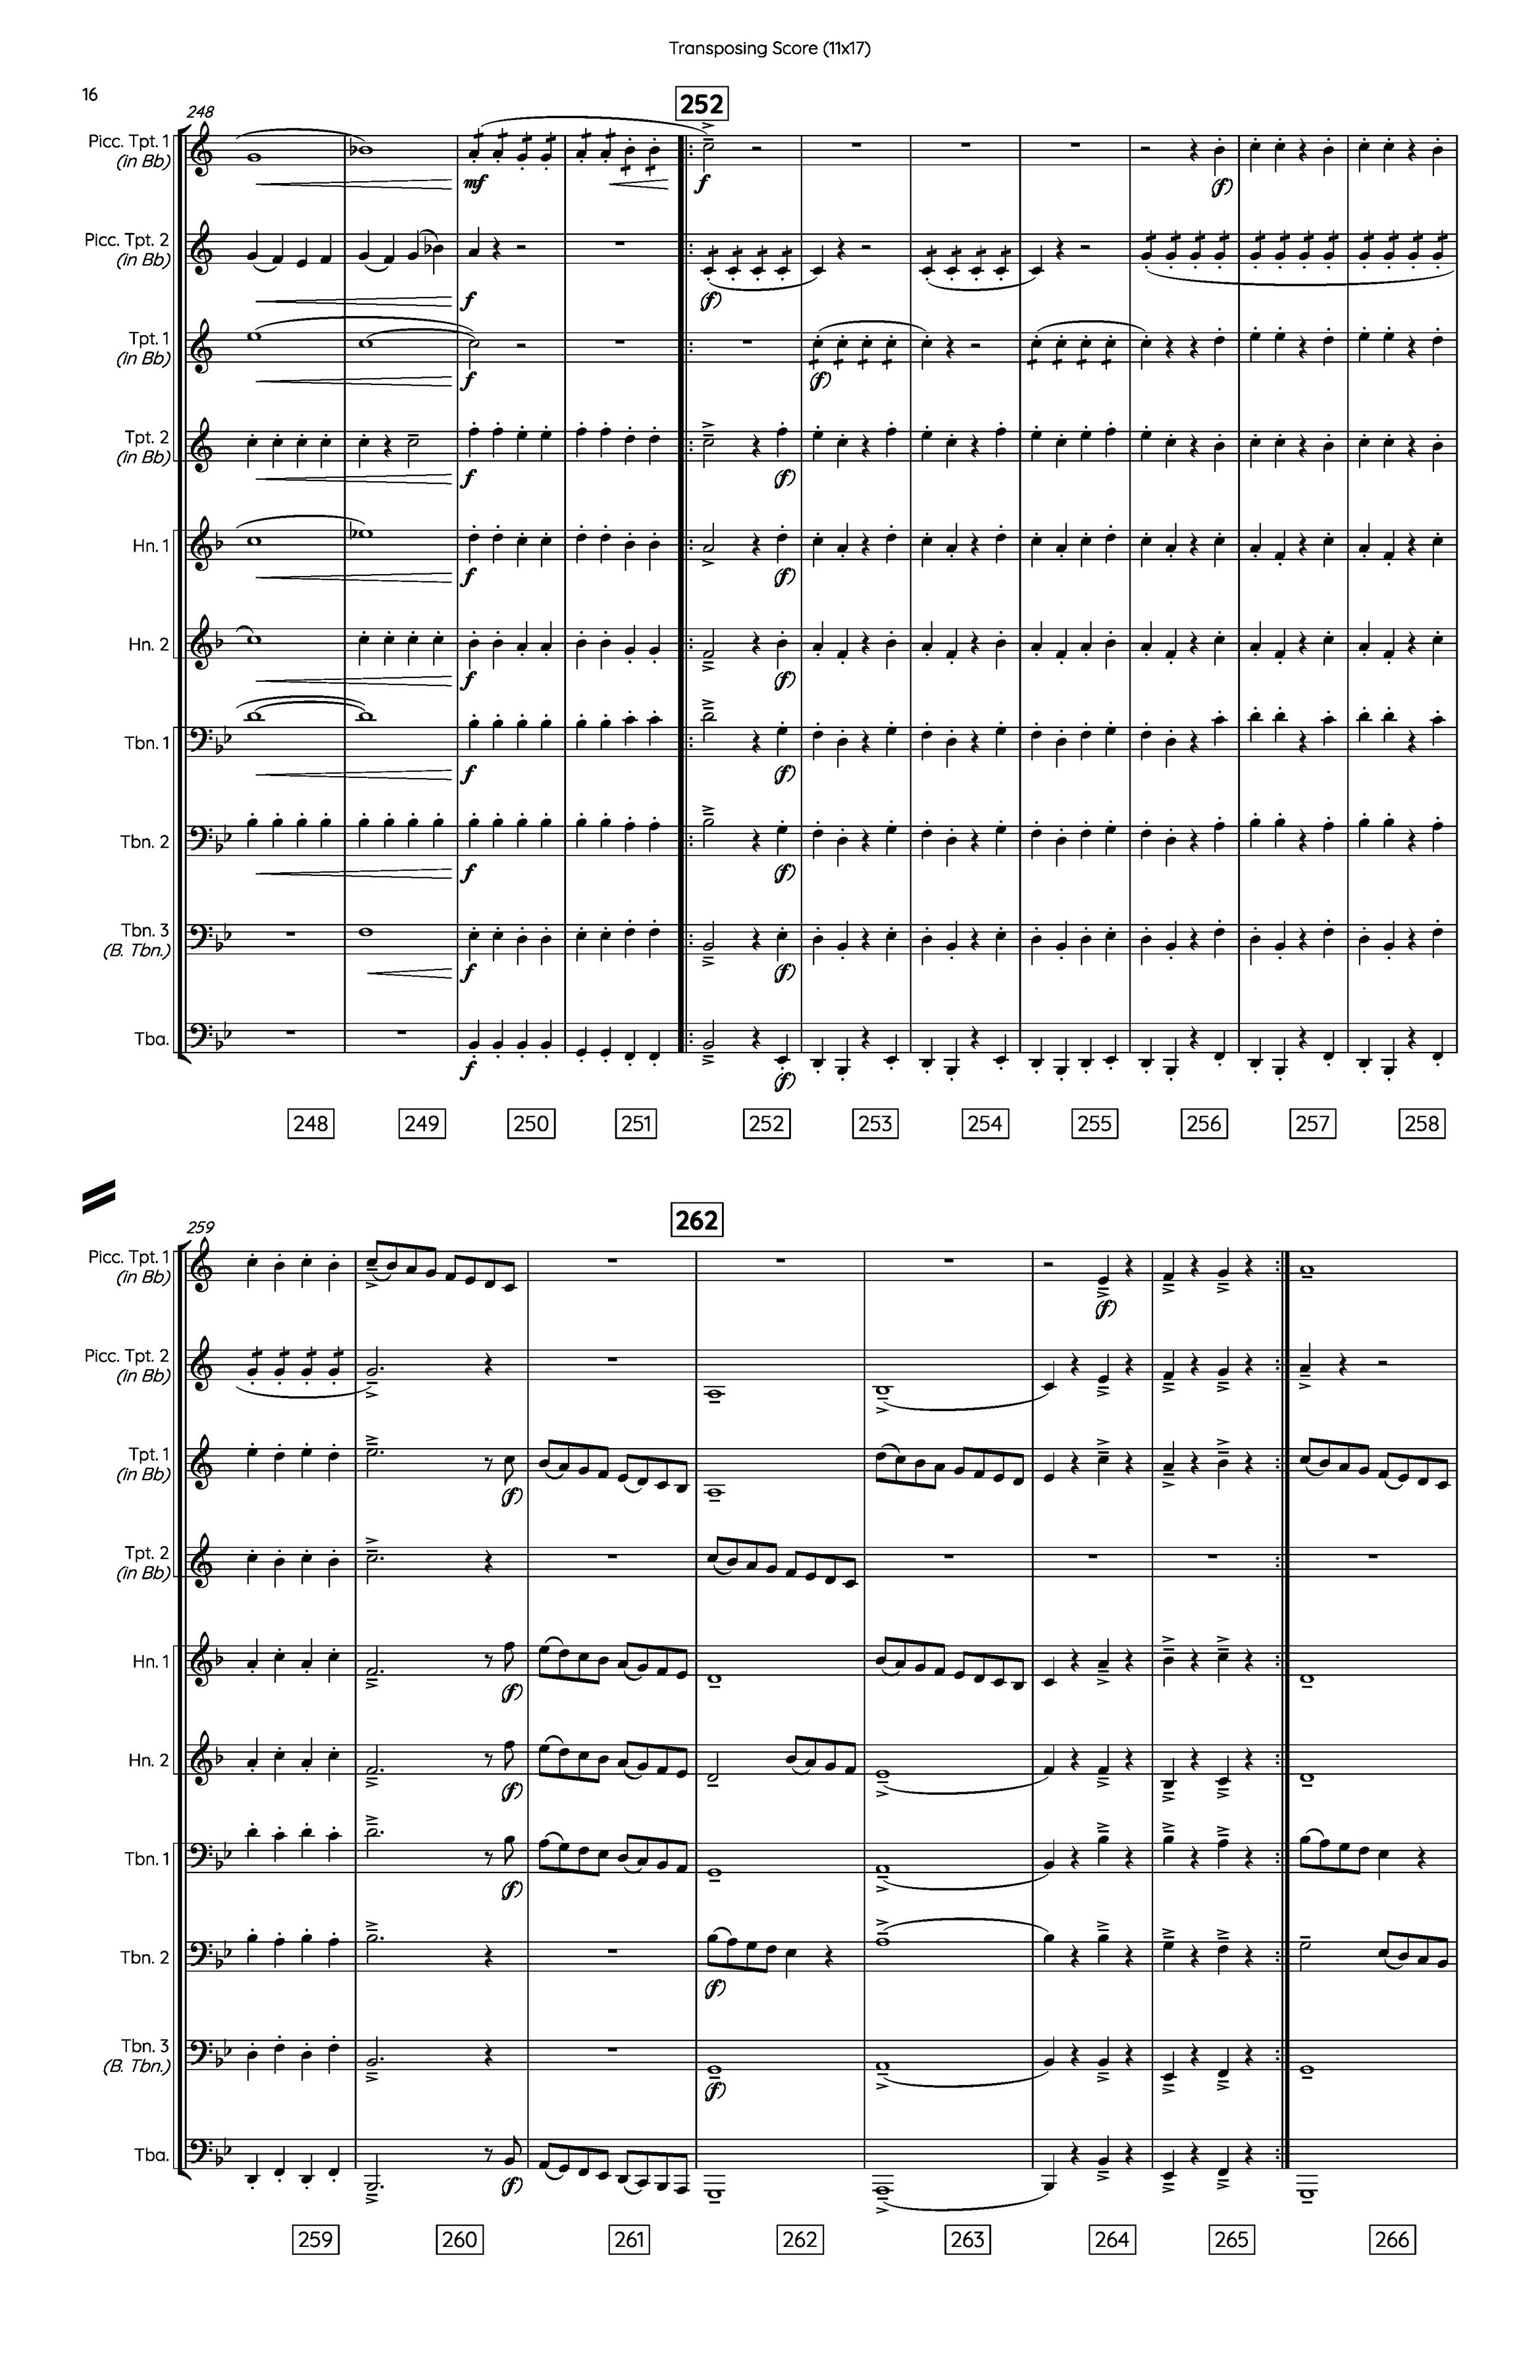 Marriage of Figaro [Brass Ensemble] in Bb - Score 11x17_Page_16.jpg